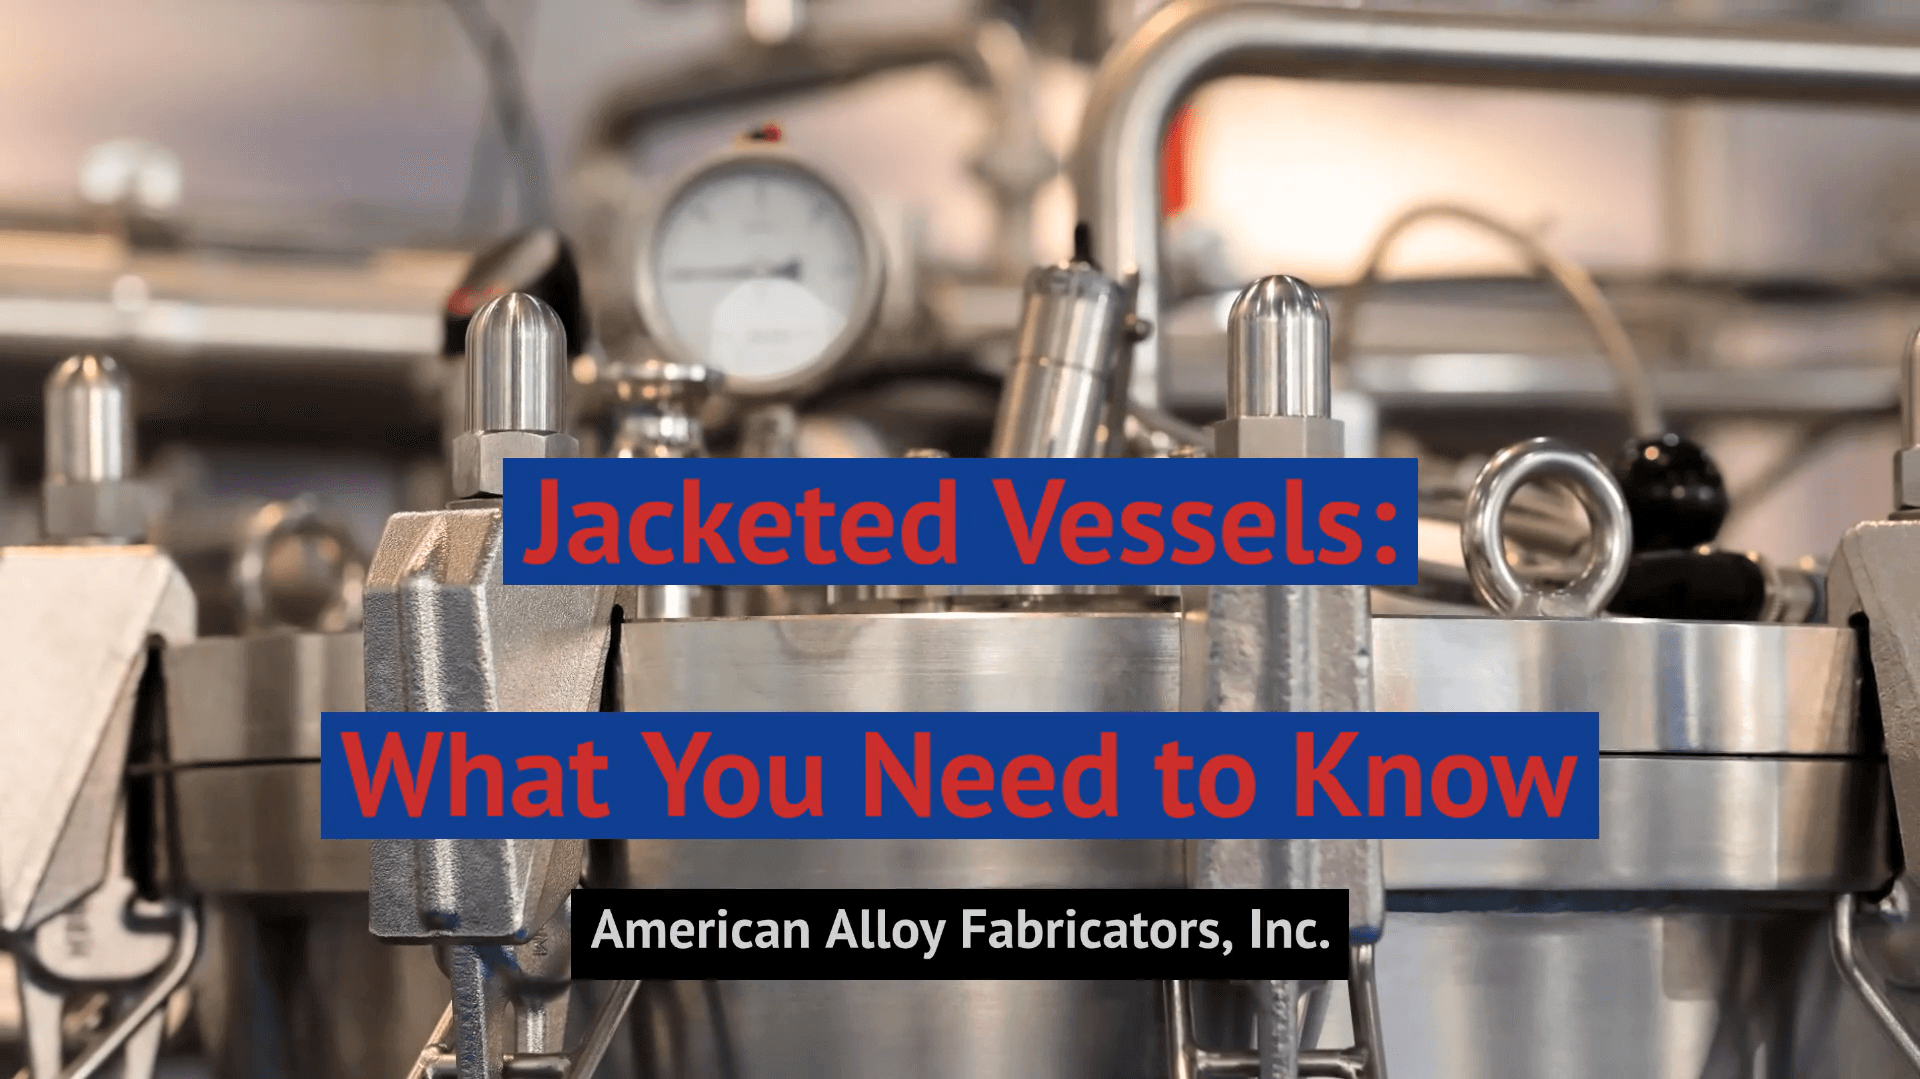 Jacketed Vessels: What You Need to Know